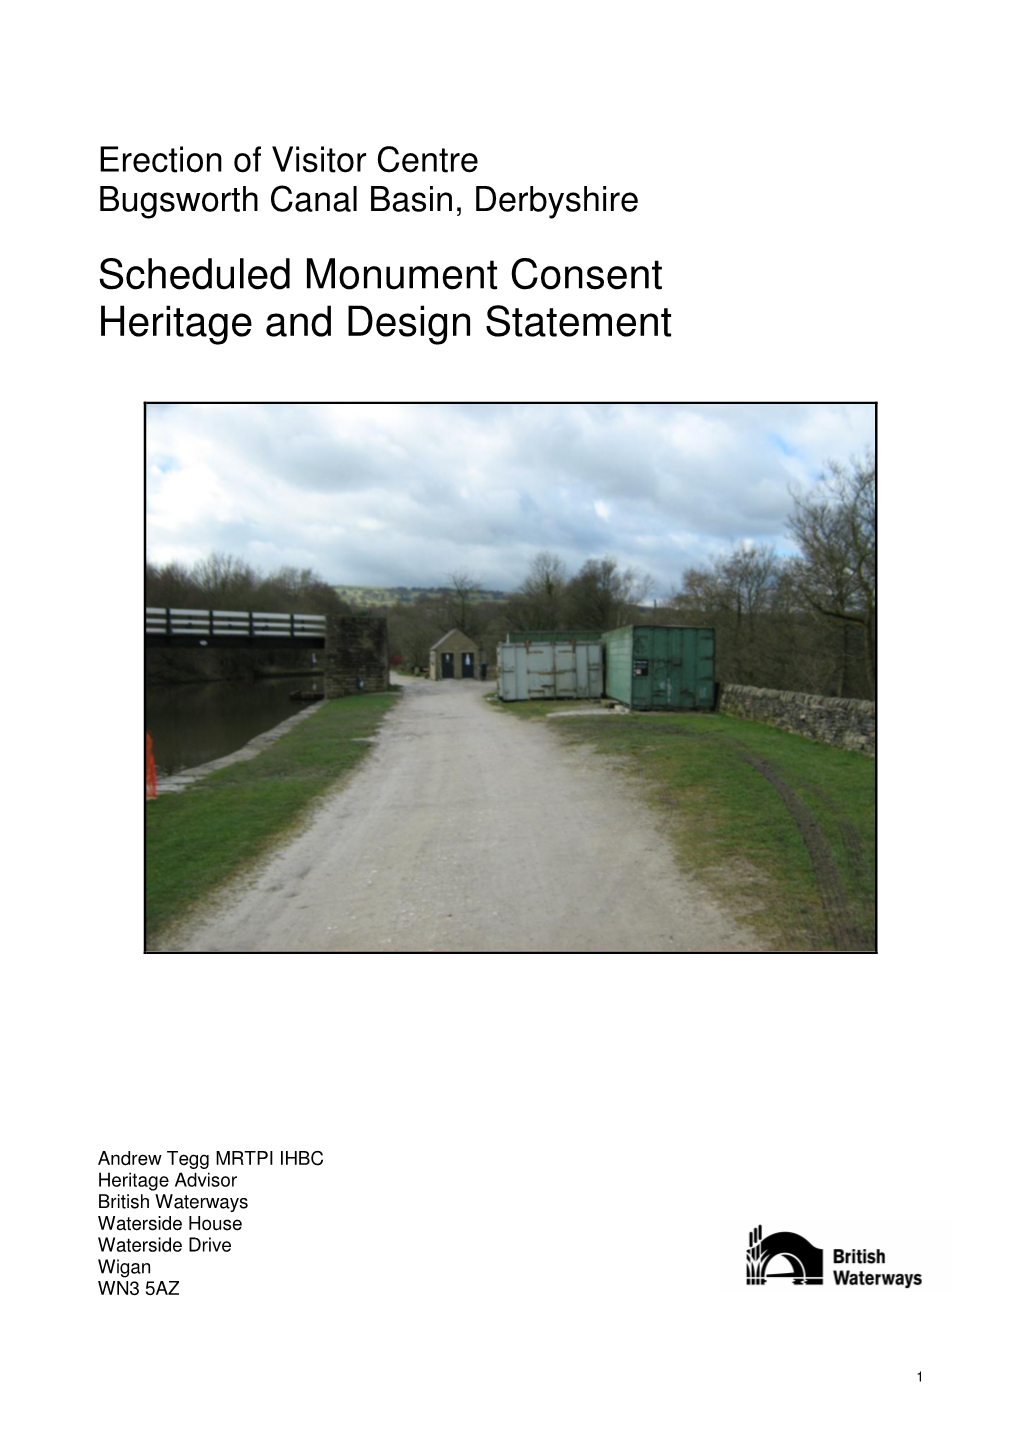 Scheduled Monument Consent Heritage and Design Statement